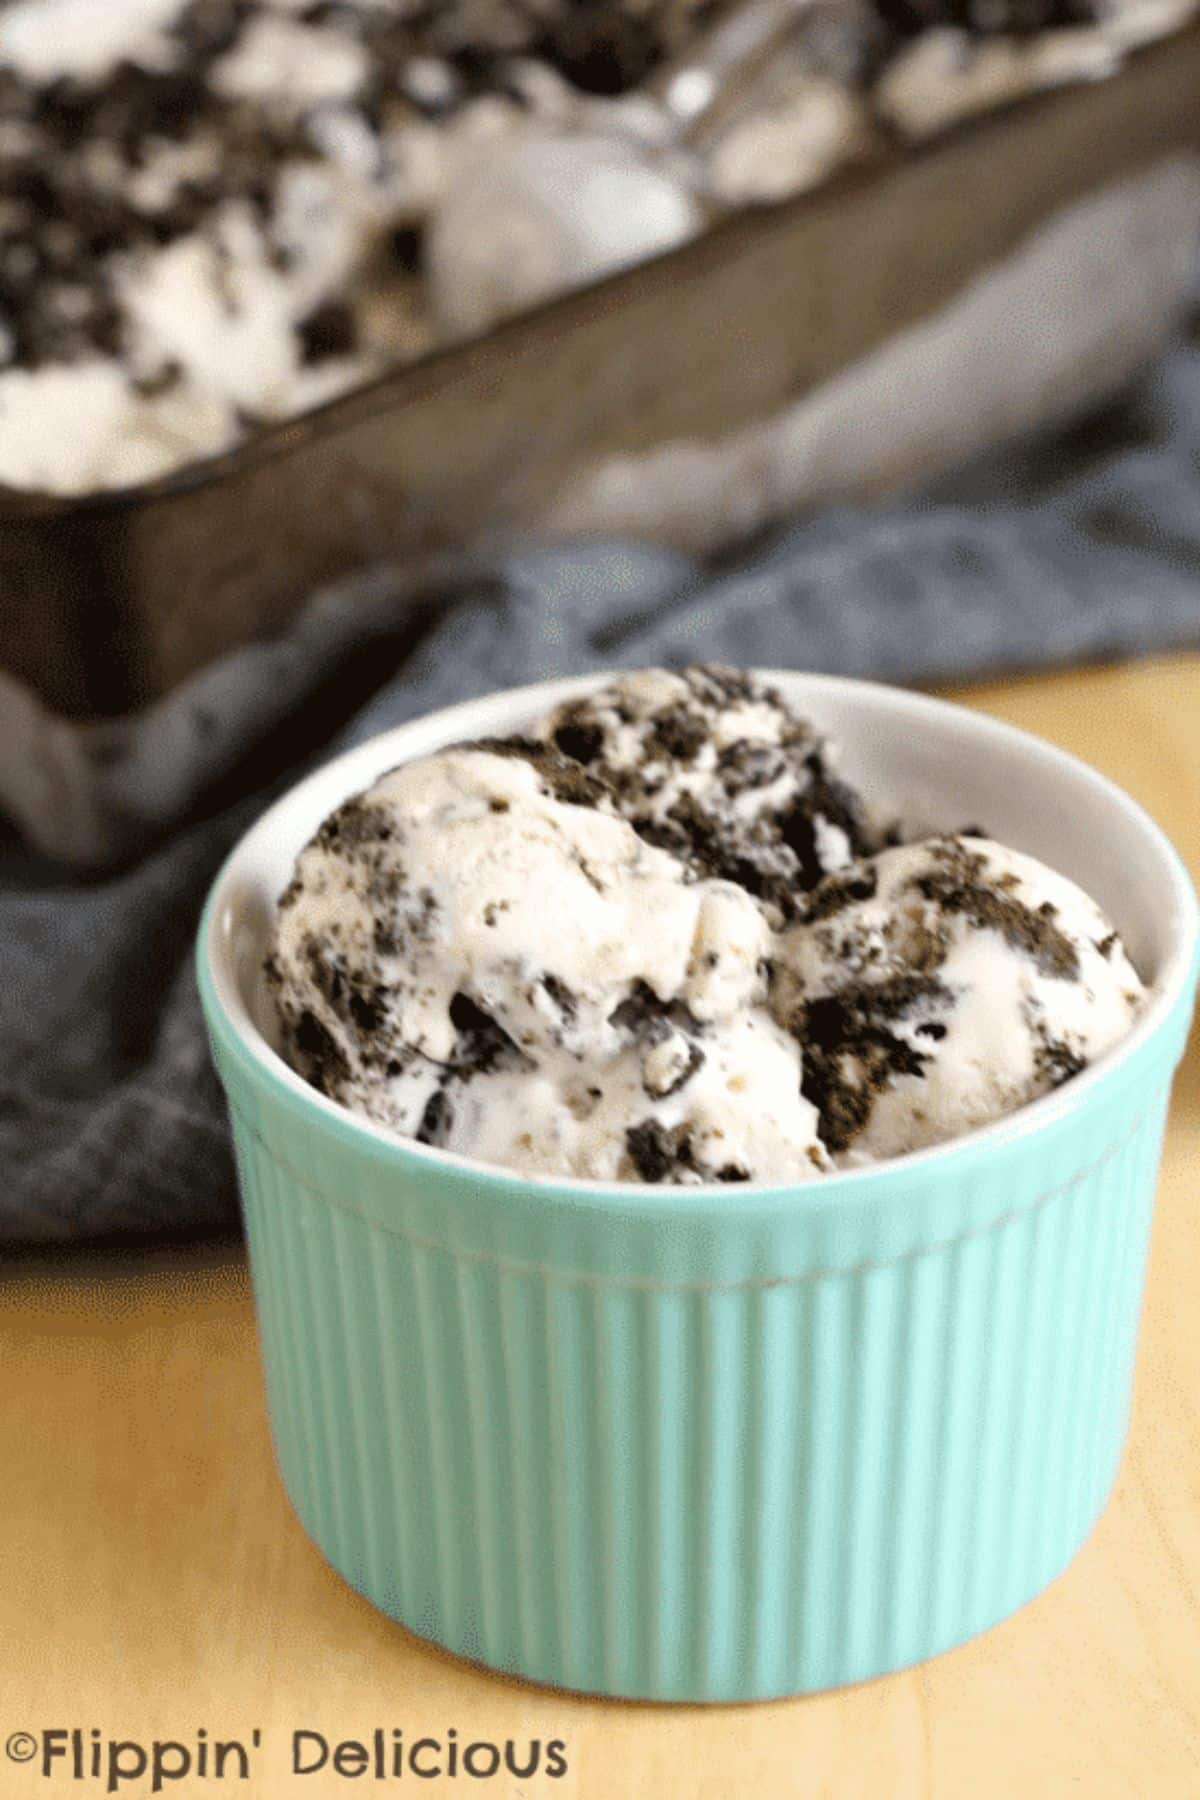 Tasty Gluten-Free Cookies and Cream Ice Cream in a small bowl.